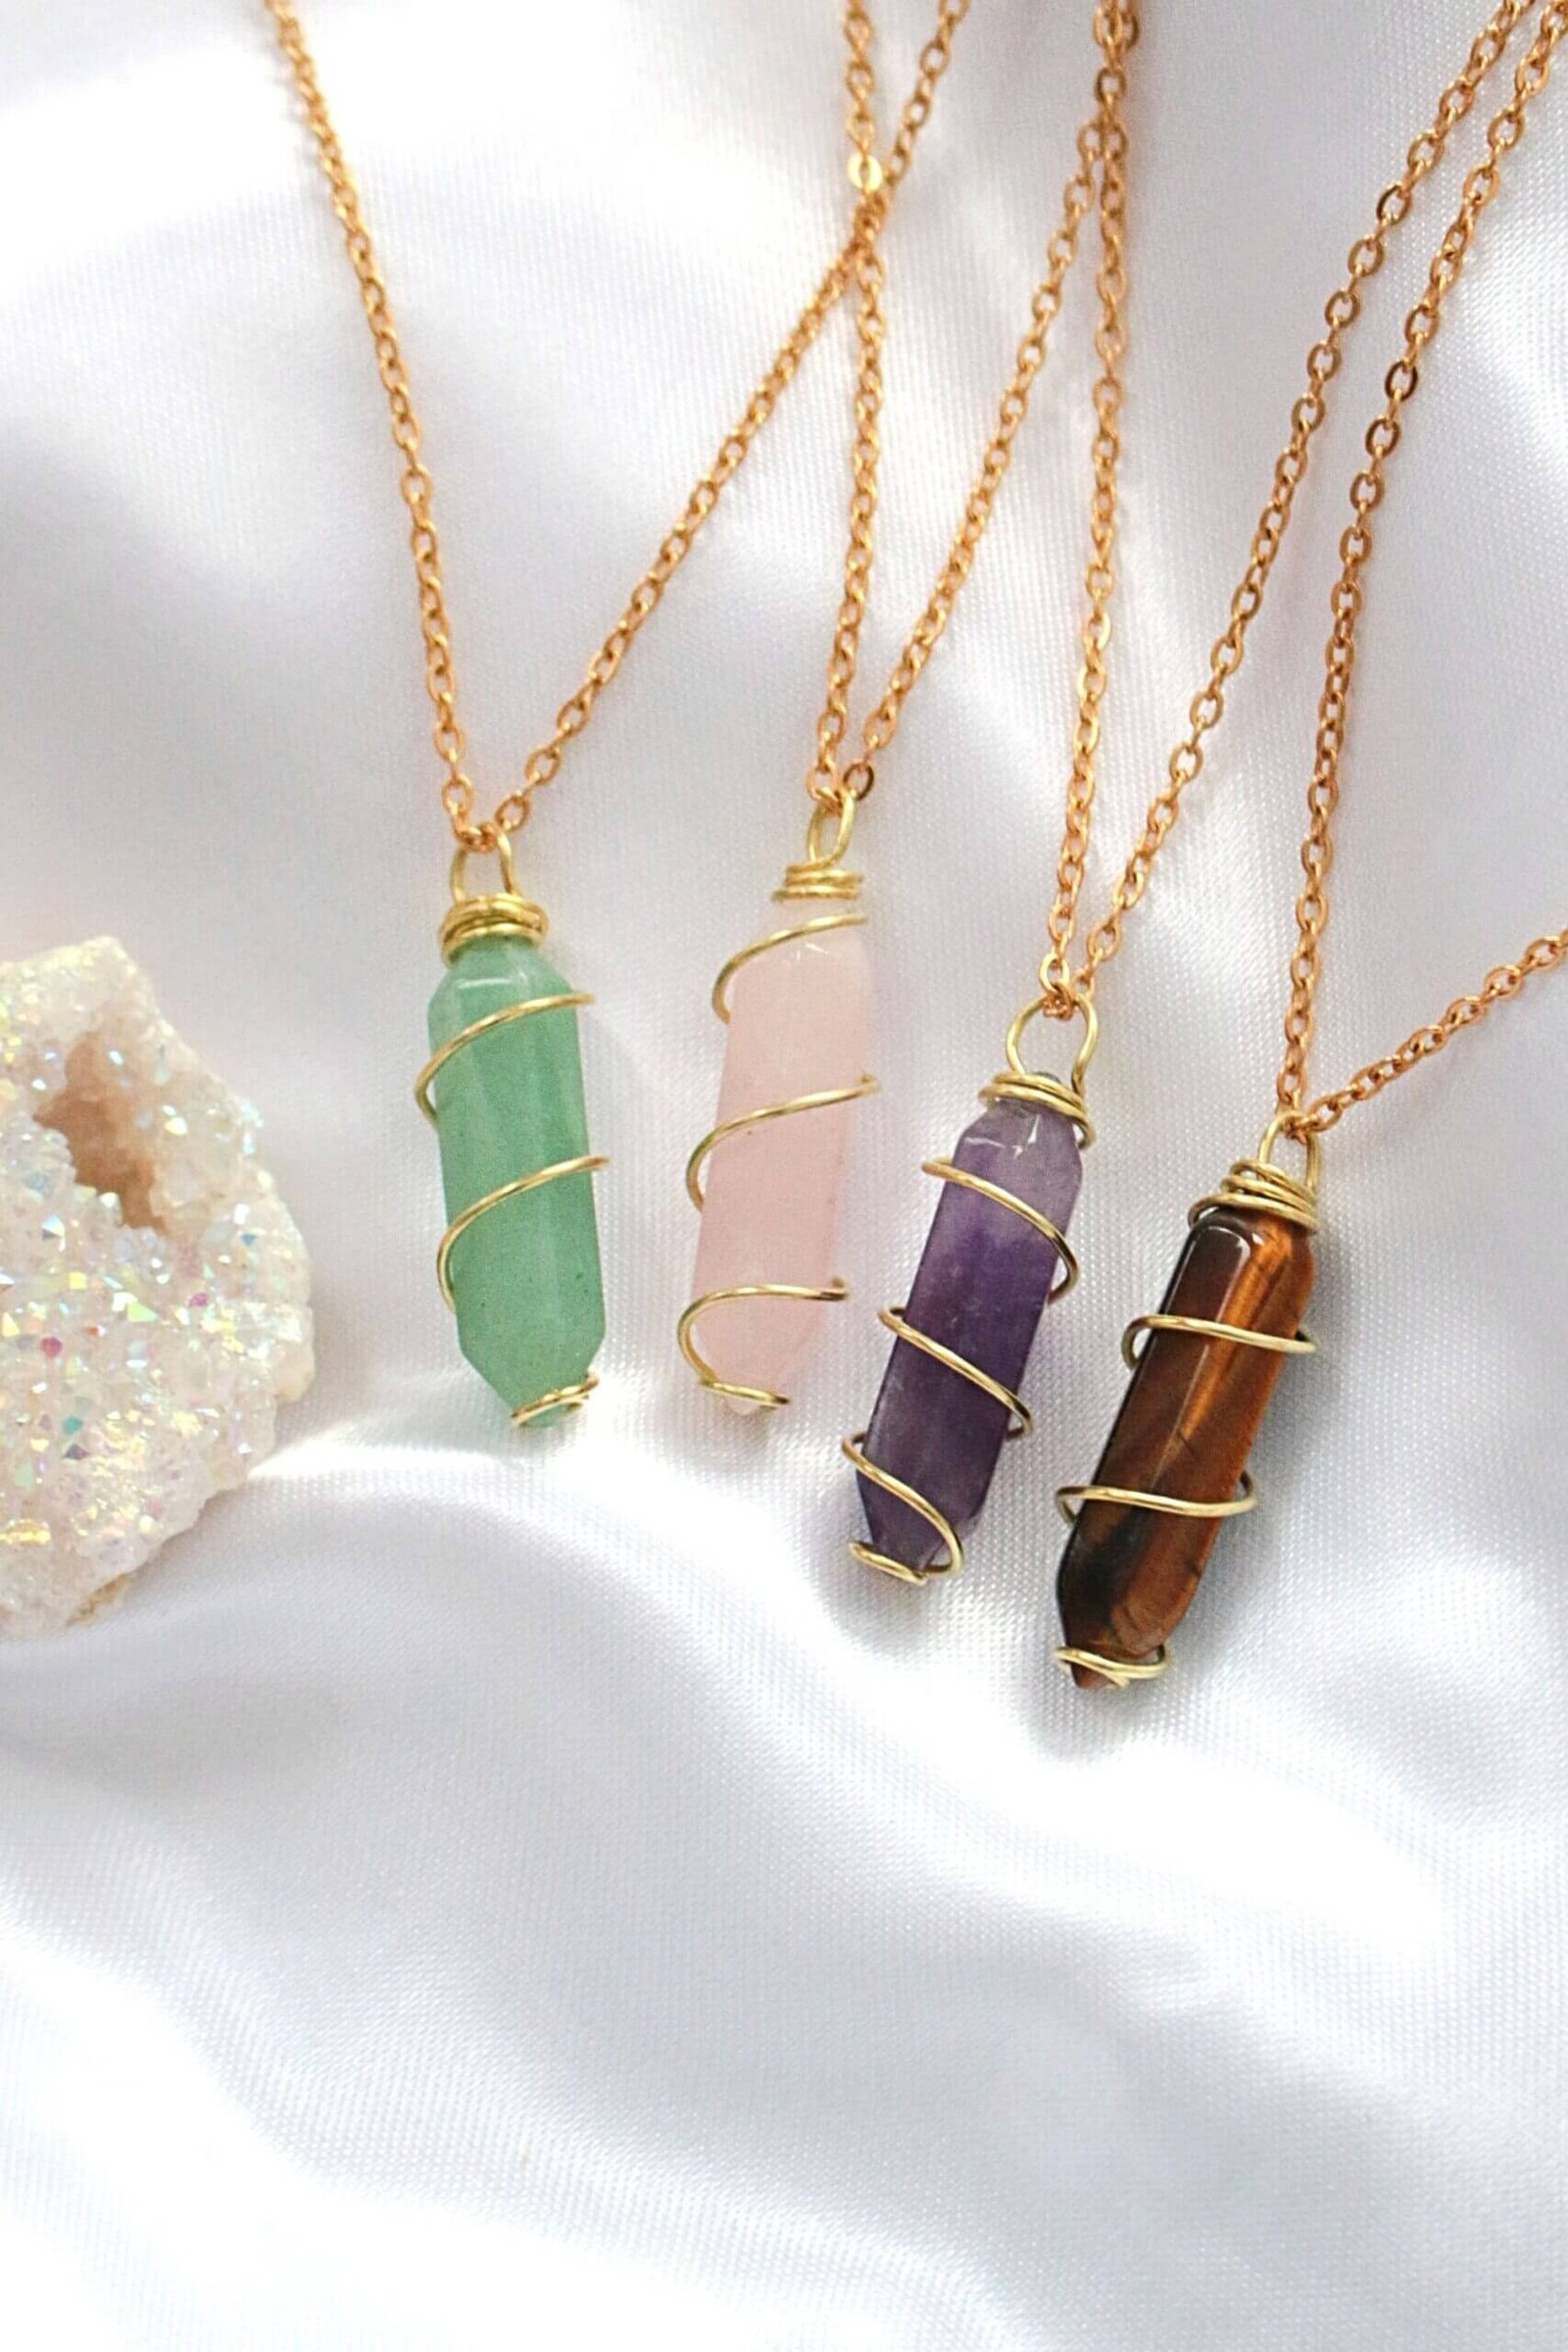 Amazon.com: Crystal Necklace Pendant Set, 36 PCS Hexagonal Crystal Clear  Gemstone Bullet Shape Artificial Stone, Healing Crystal Chakra Pointed  Quartz Stones Jewelry Making Charms for Women Girls Friends Gift